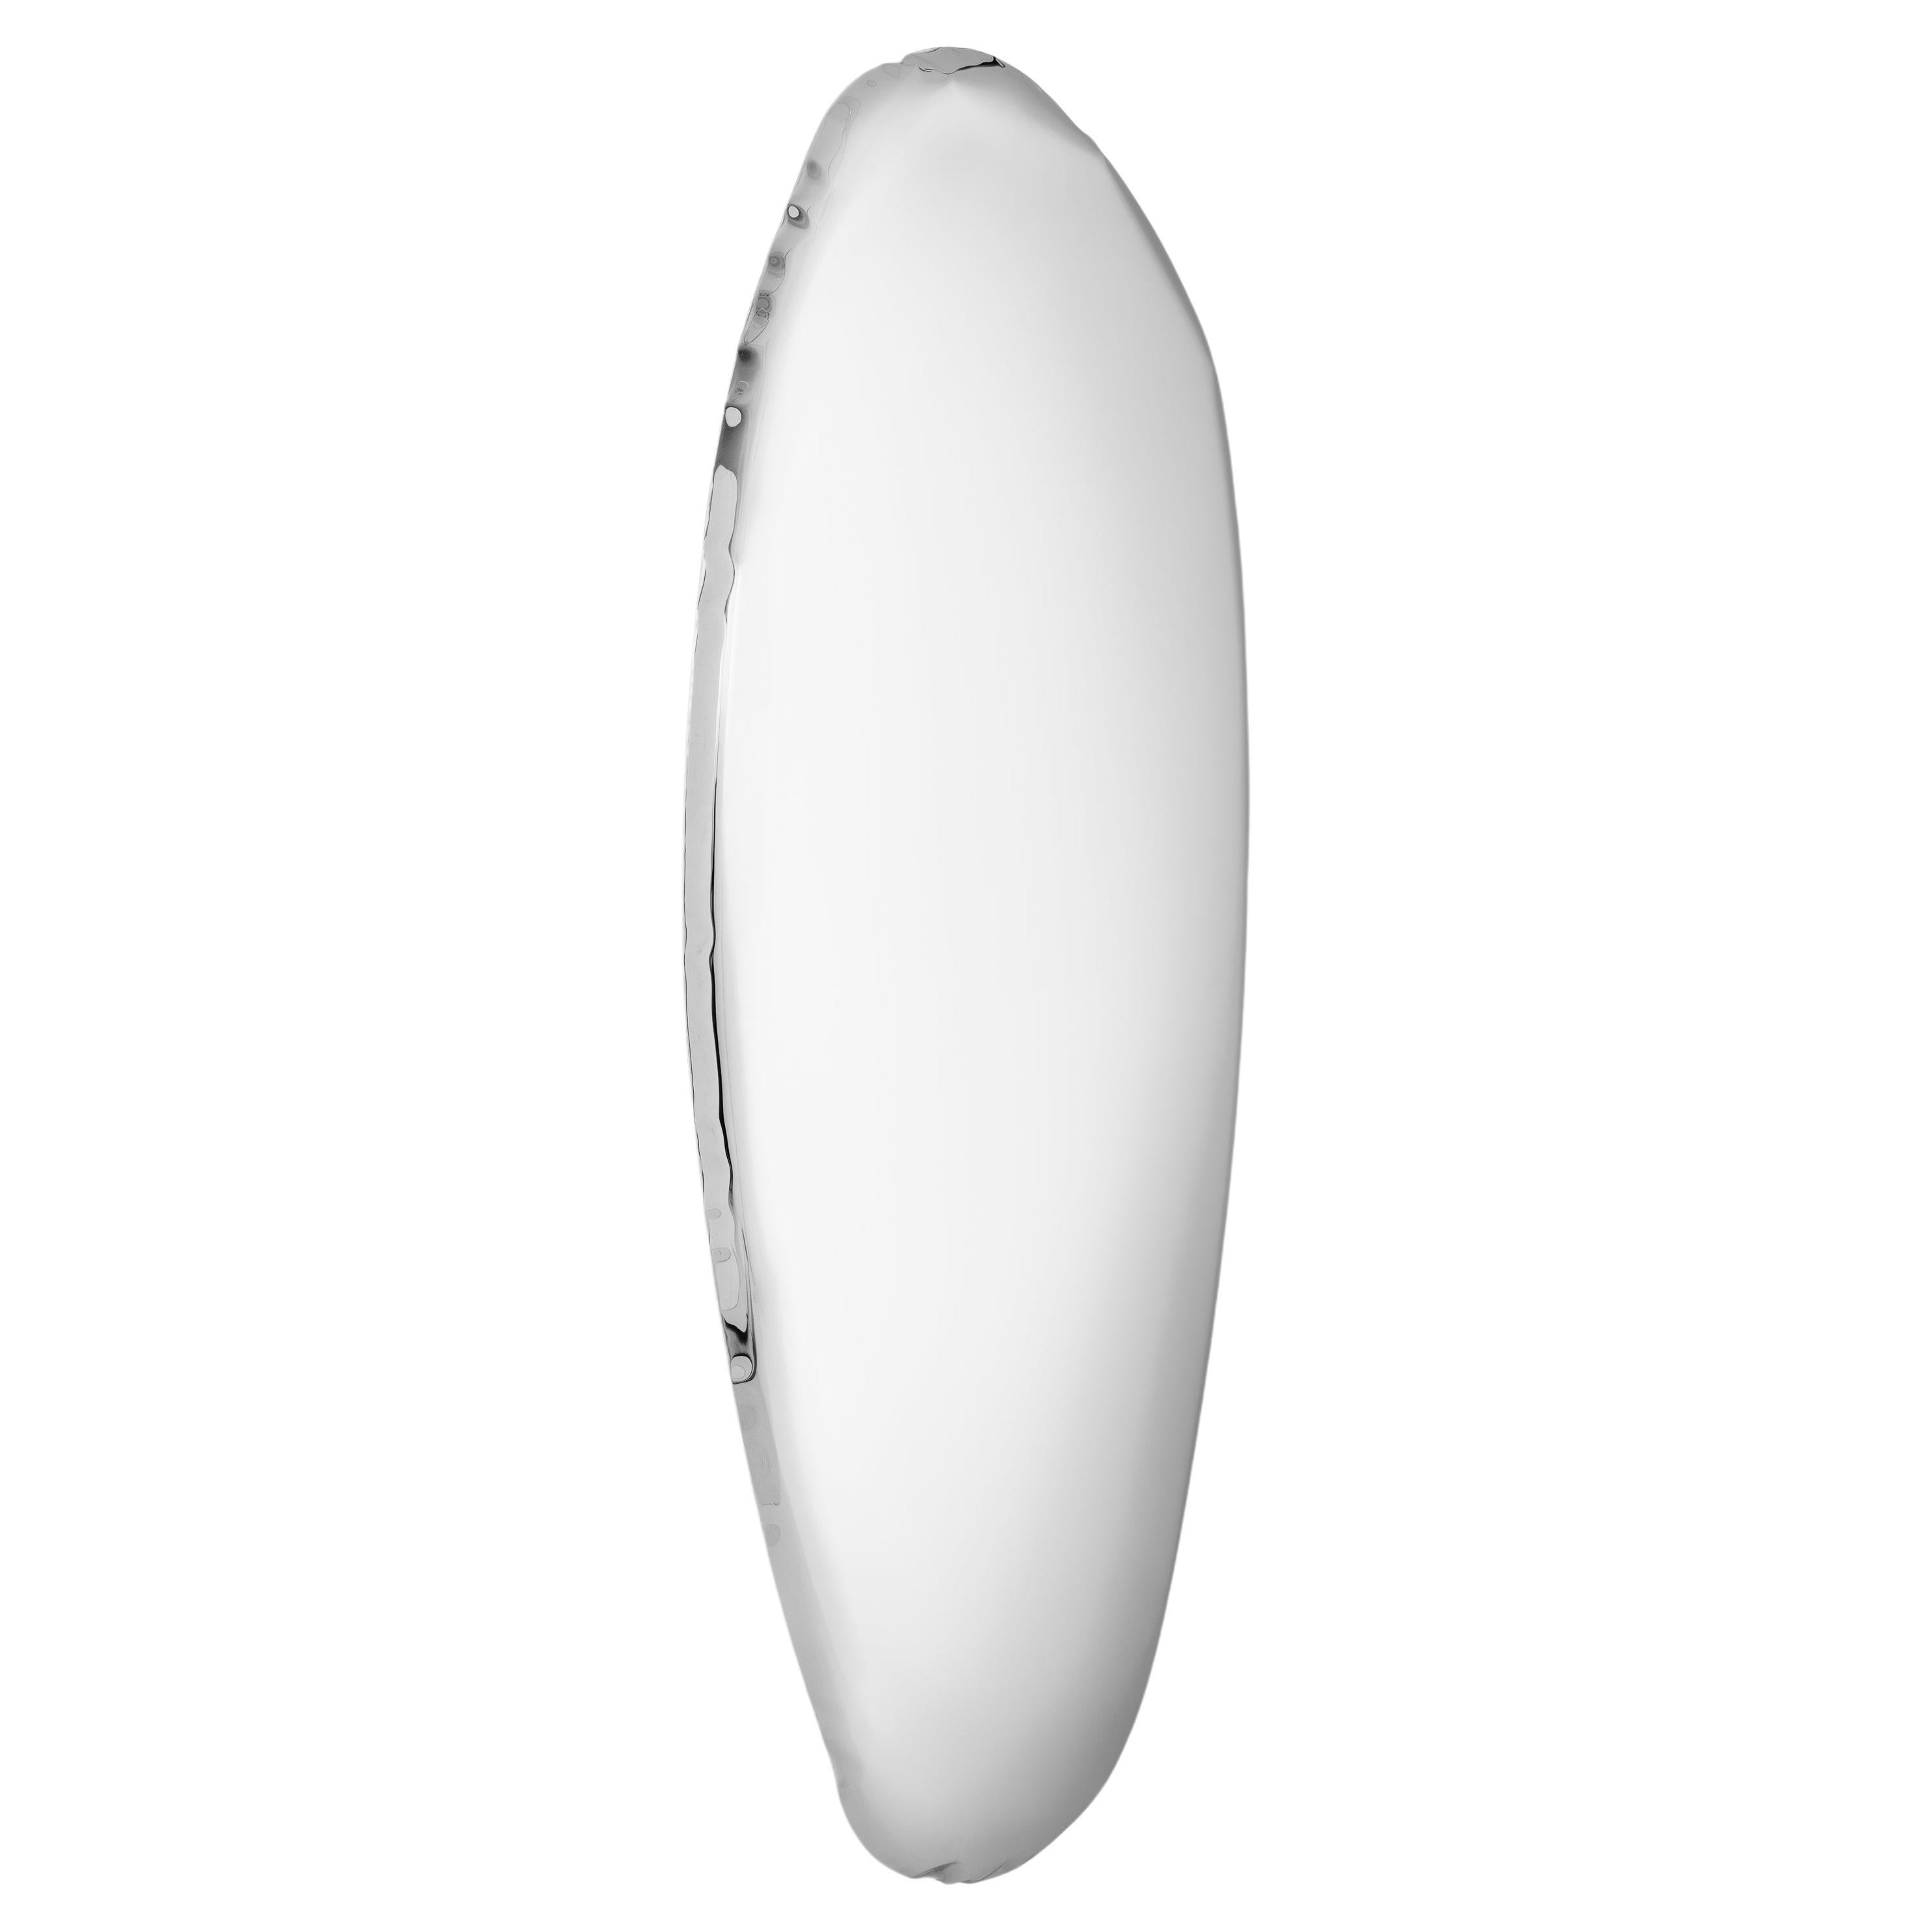 In Stock Tafla O1 Polished Stainless Steel Wall Mirror by Zieta For Sale